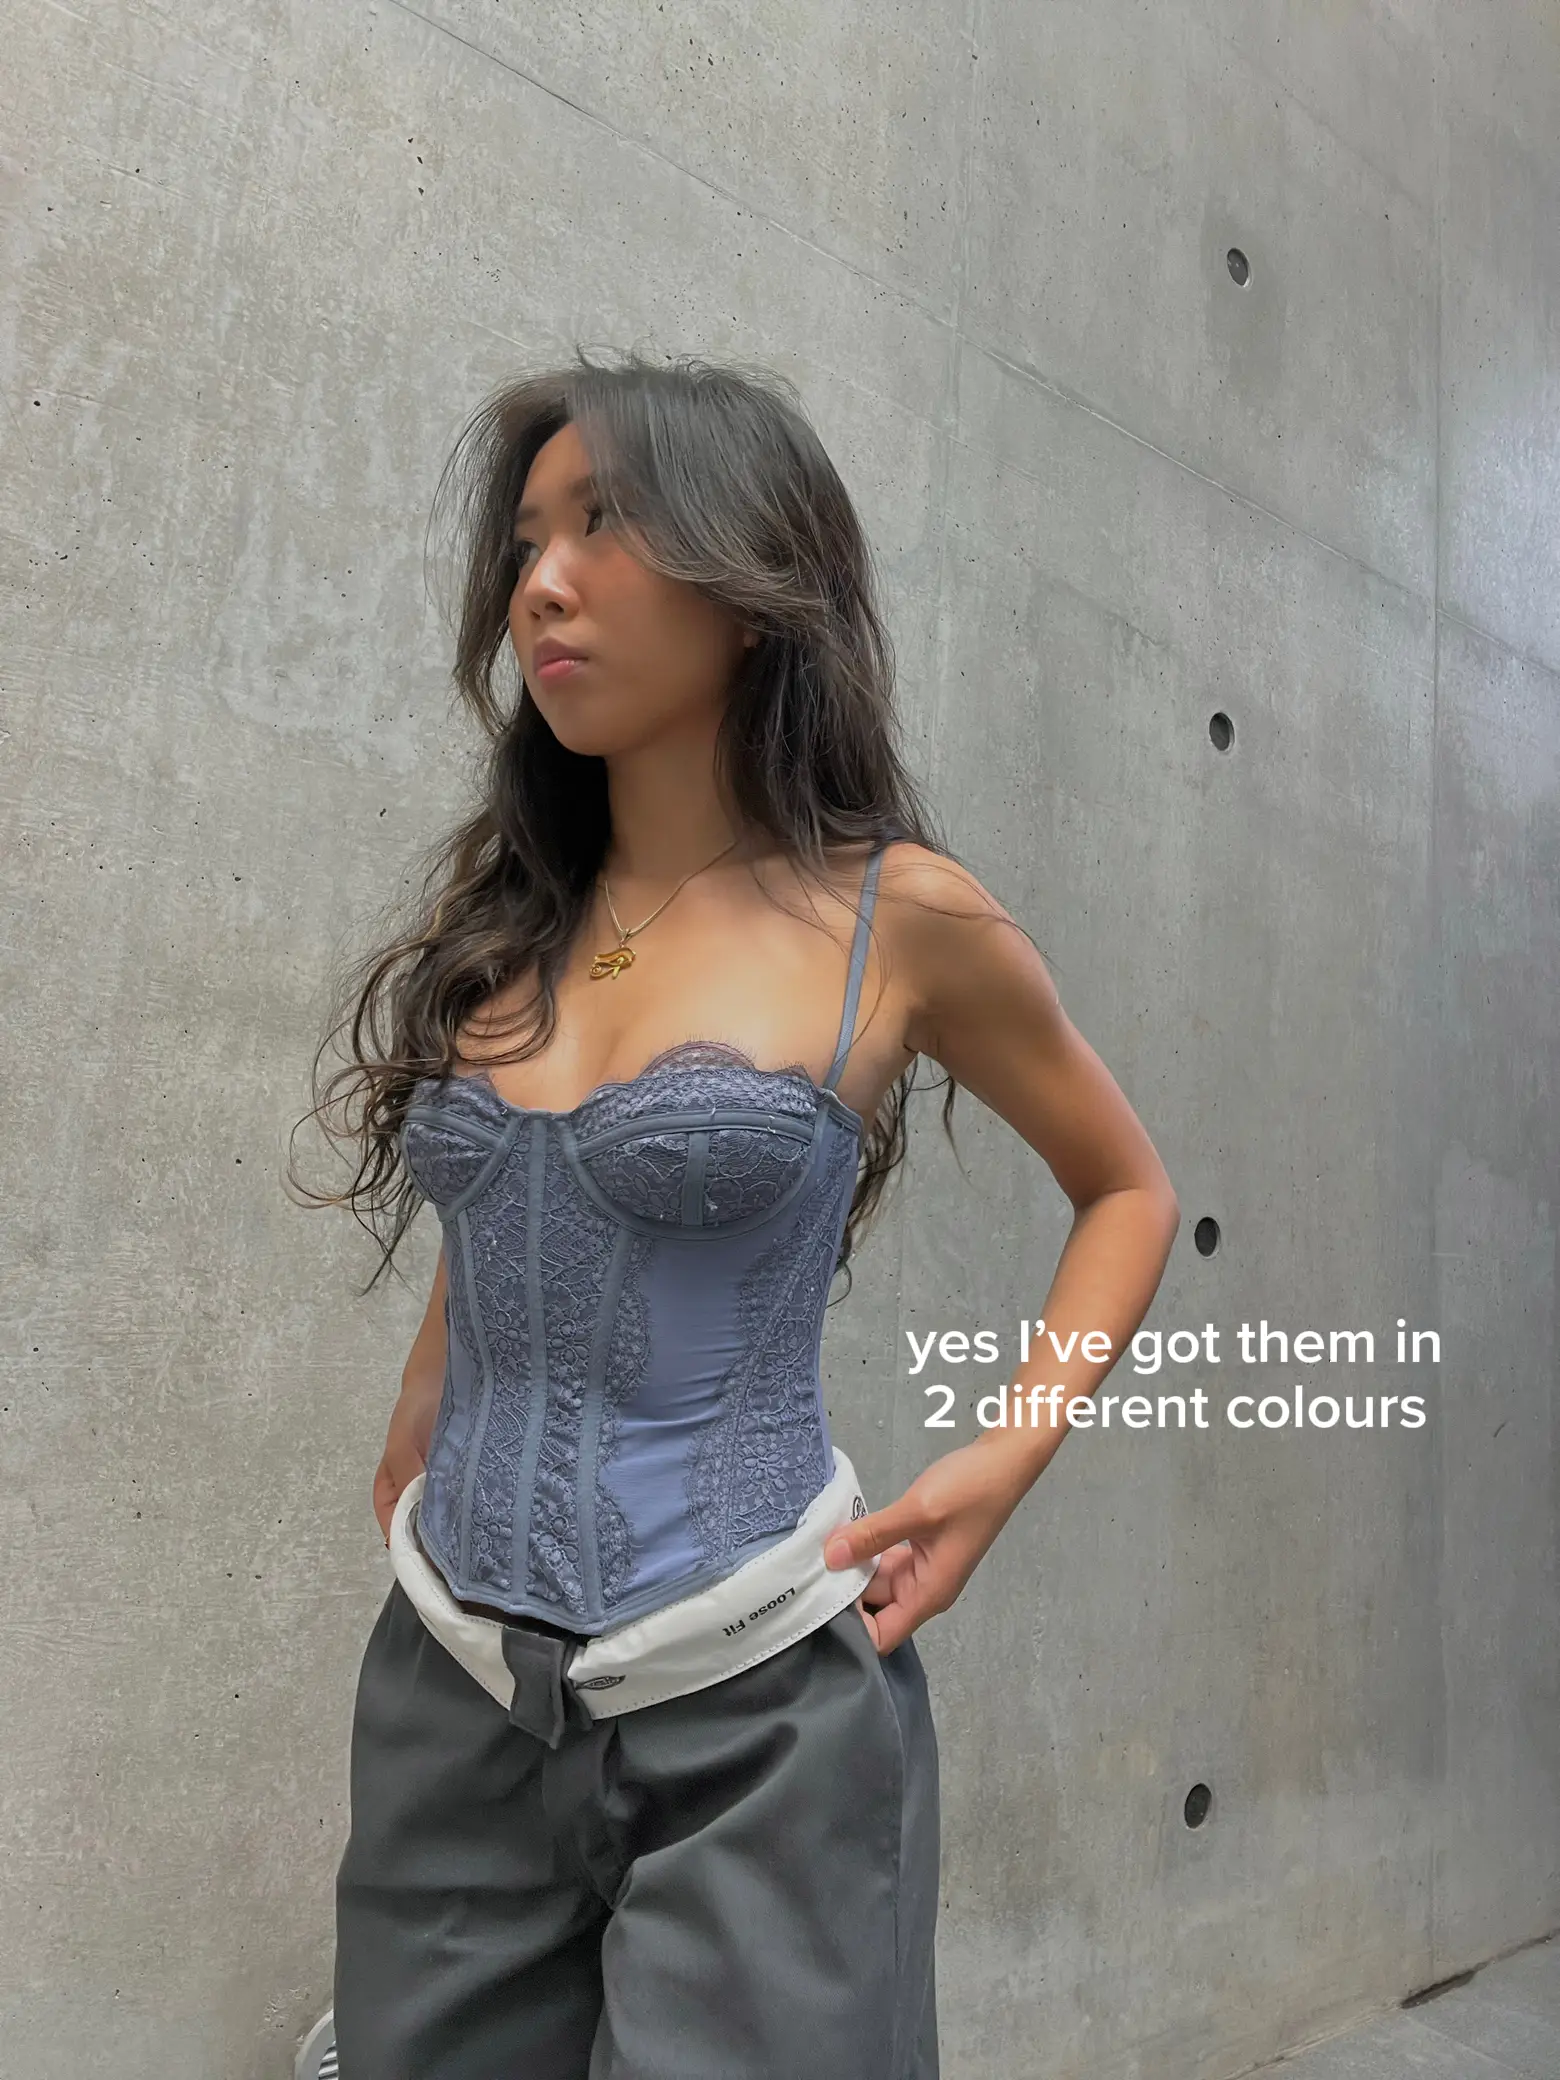 Three C's of dilemma for women : Camisole, Corsets, Chemise